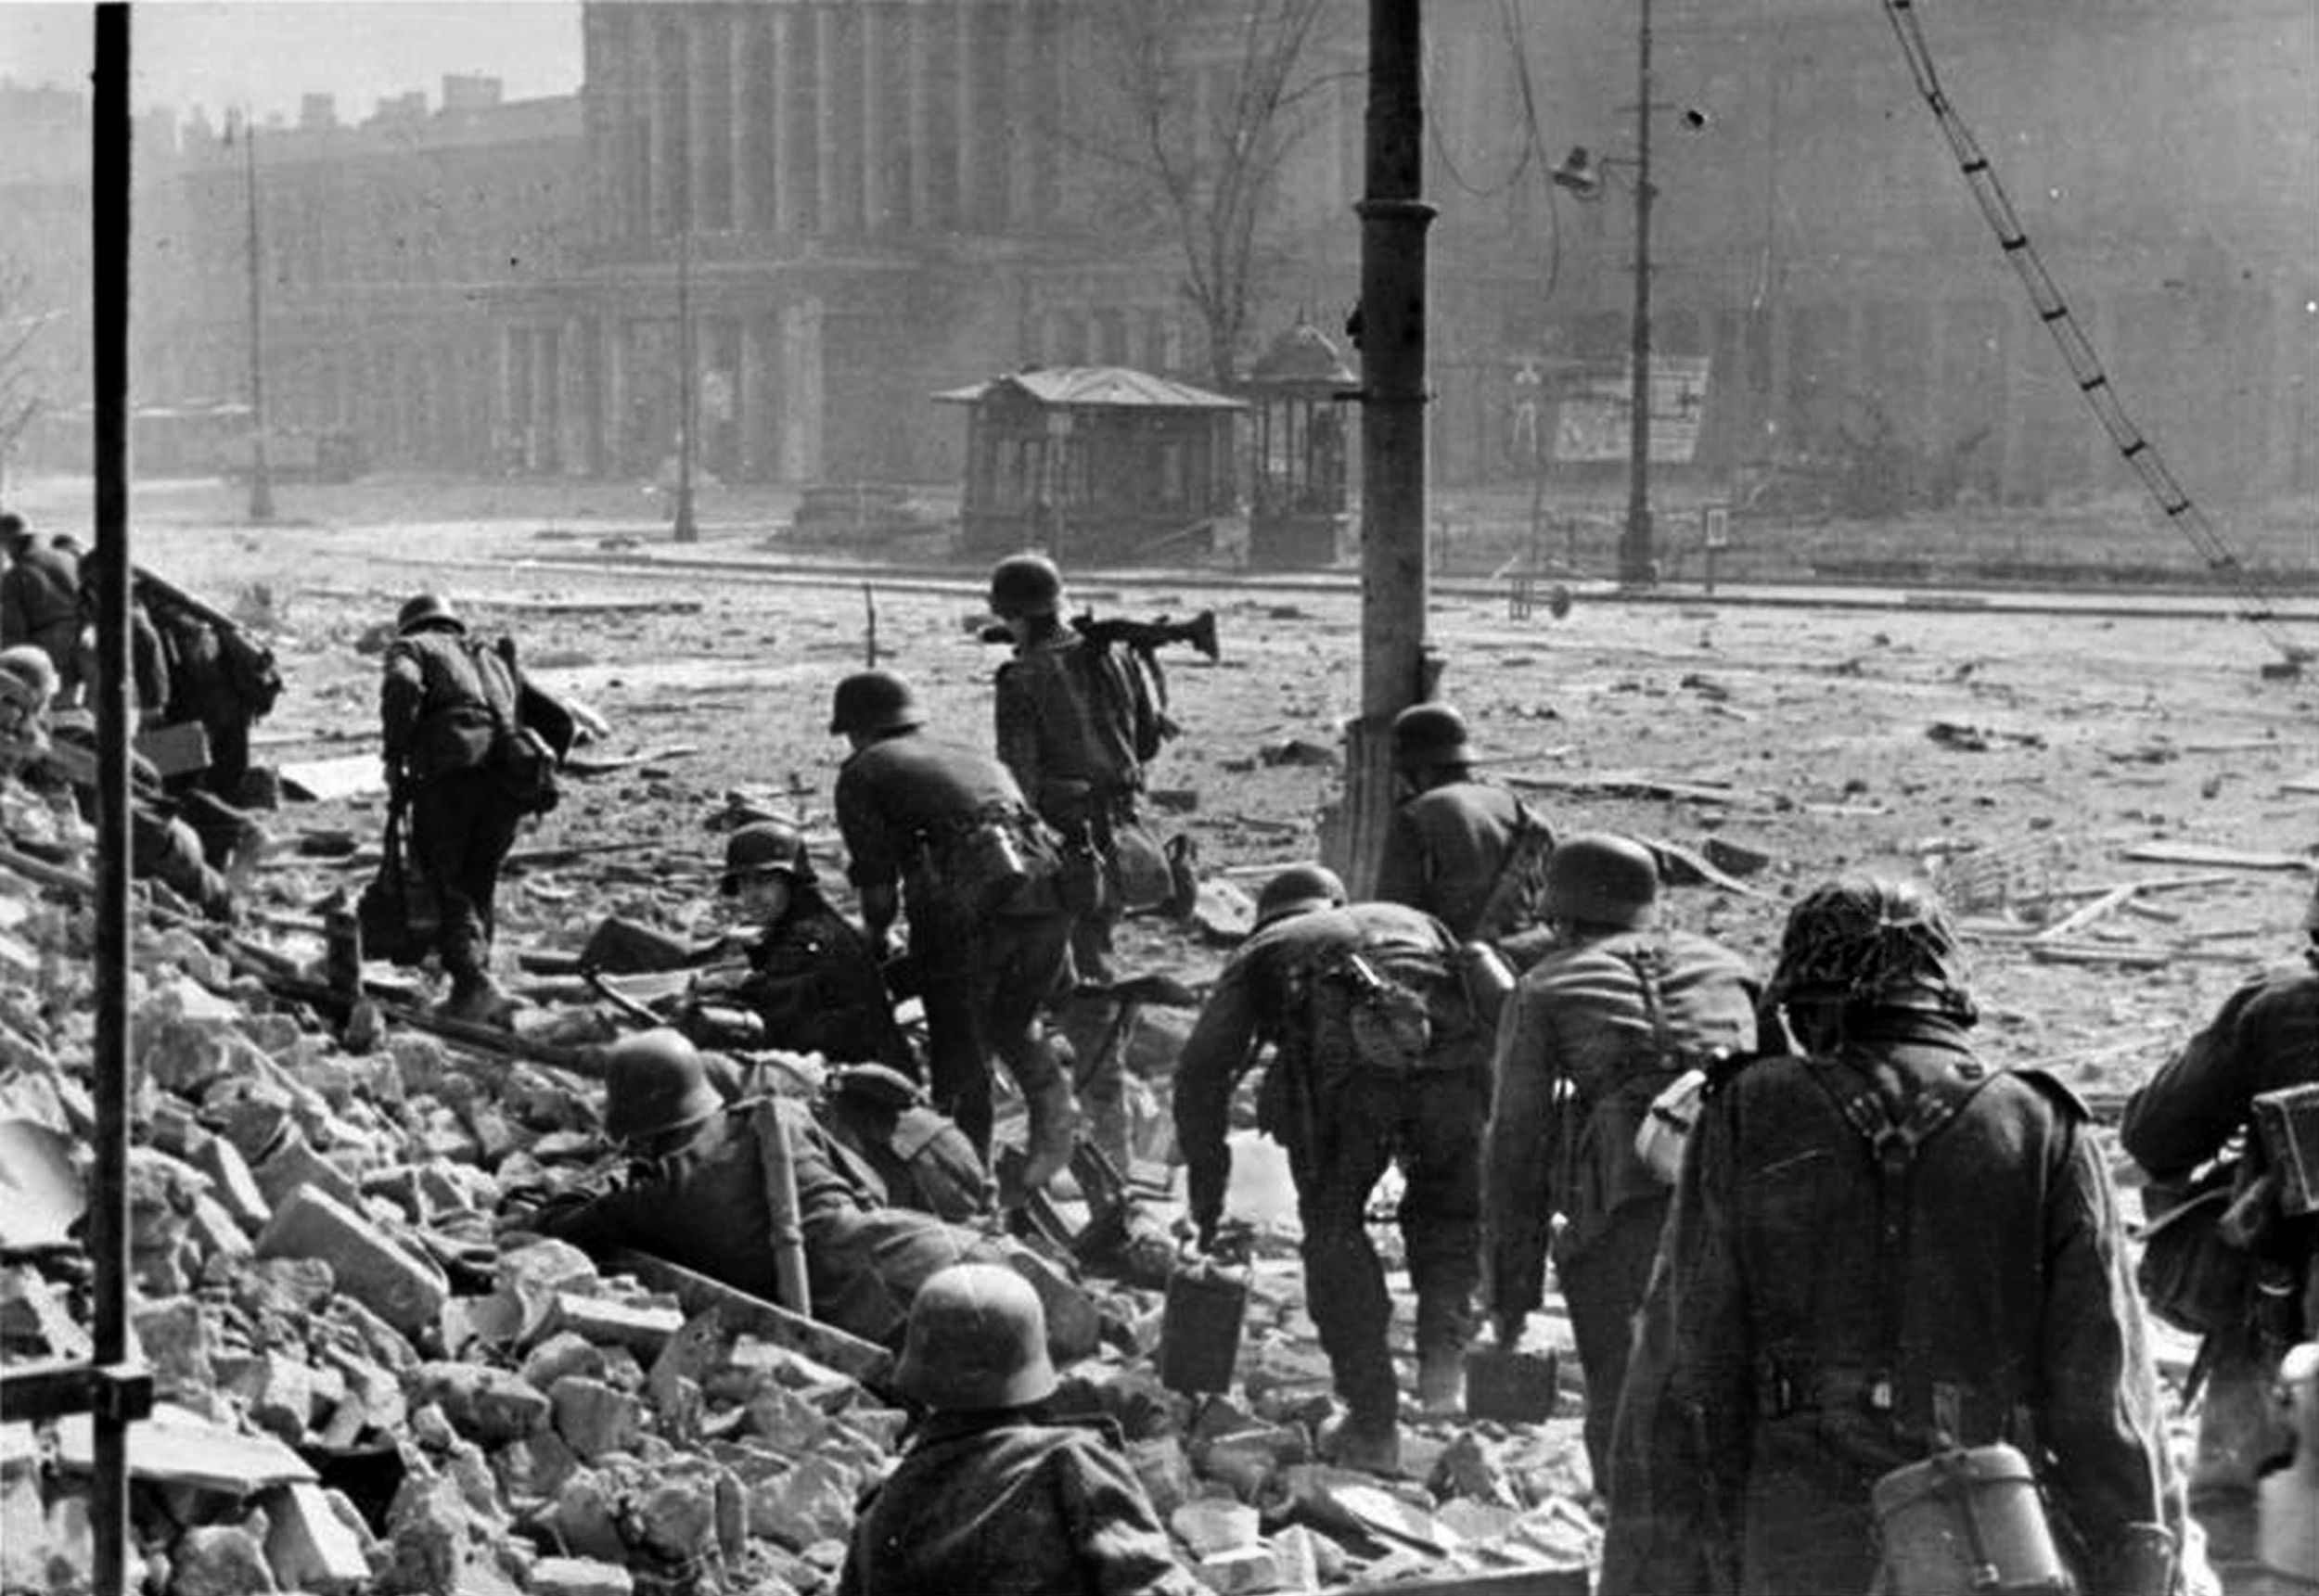 Launching an attack on a Polish strongpoint, German soldiers move through the rubble of Warsaw’s Theater Square, September 11, 1944. German forces suffered heavy casualties. 